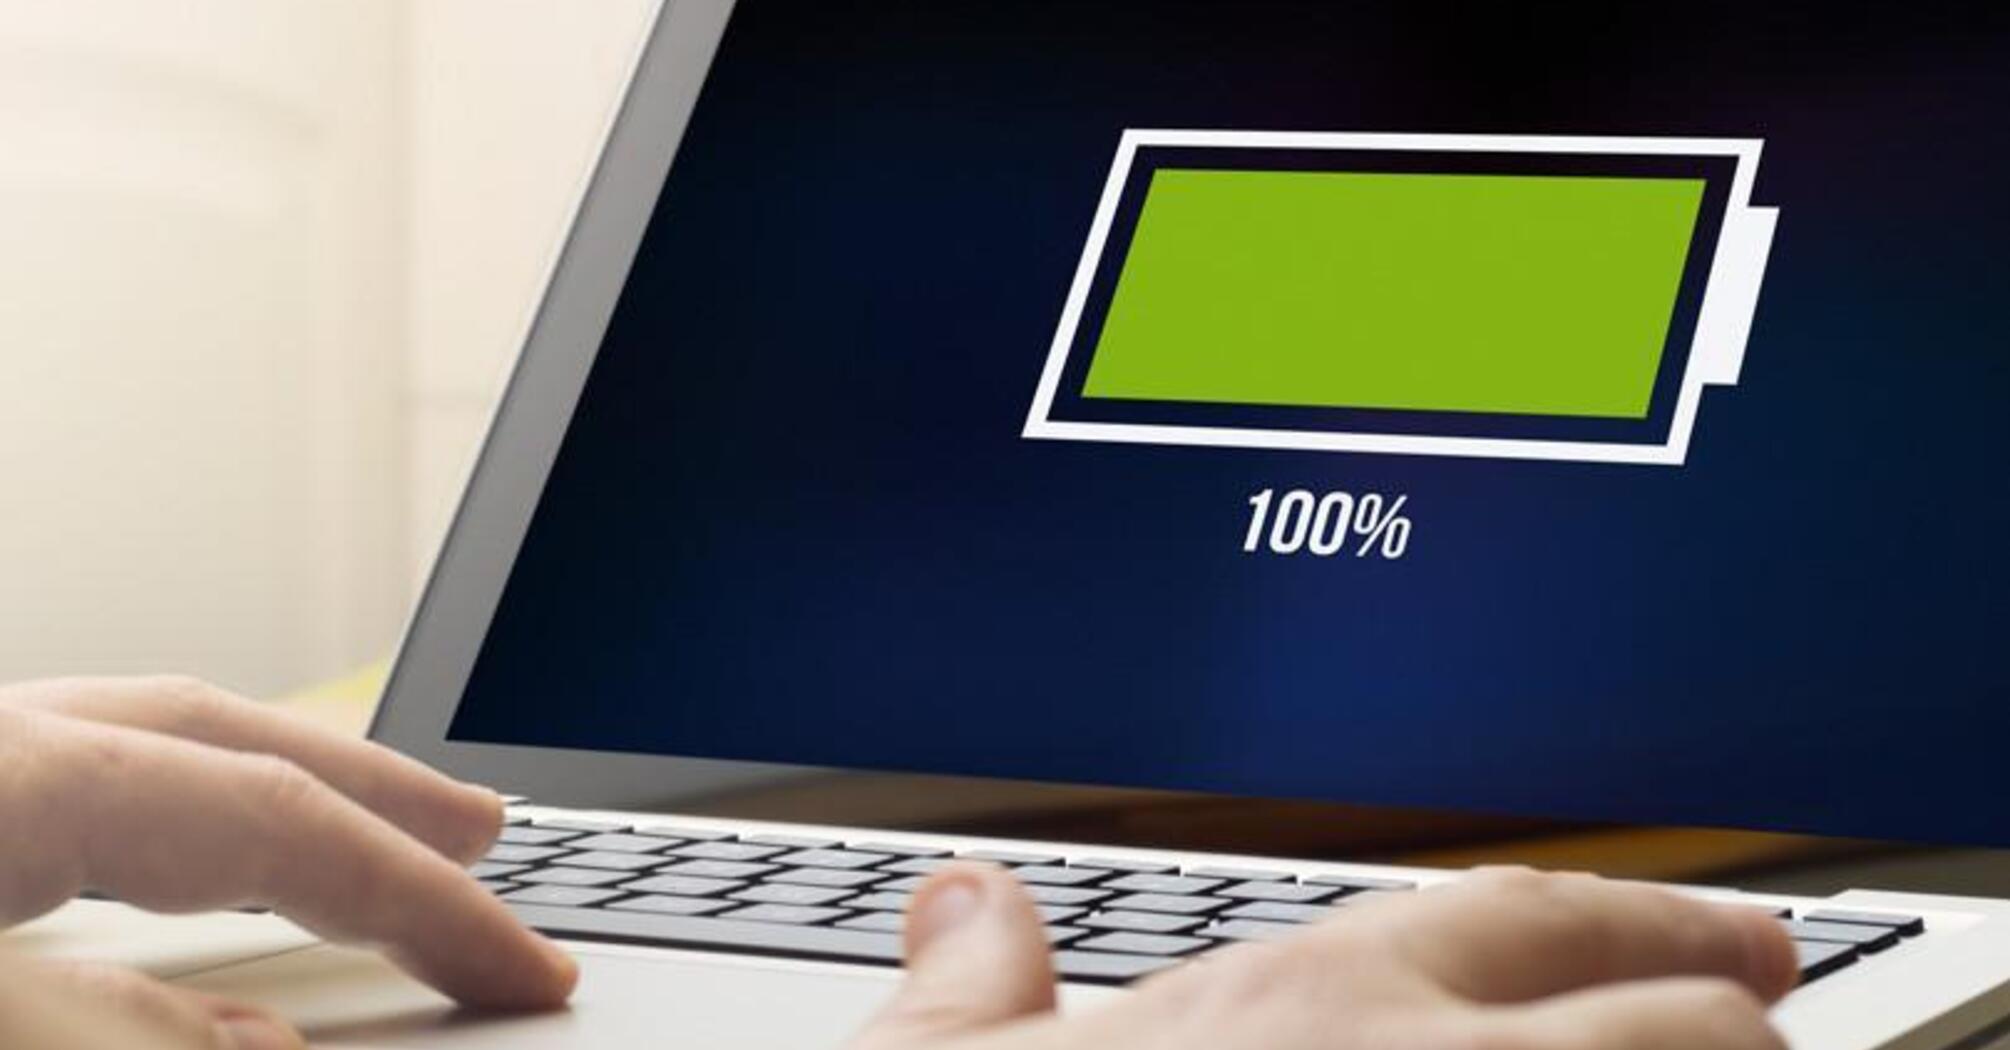 How to increase laptop battery life